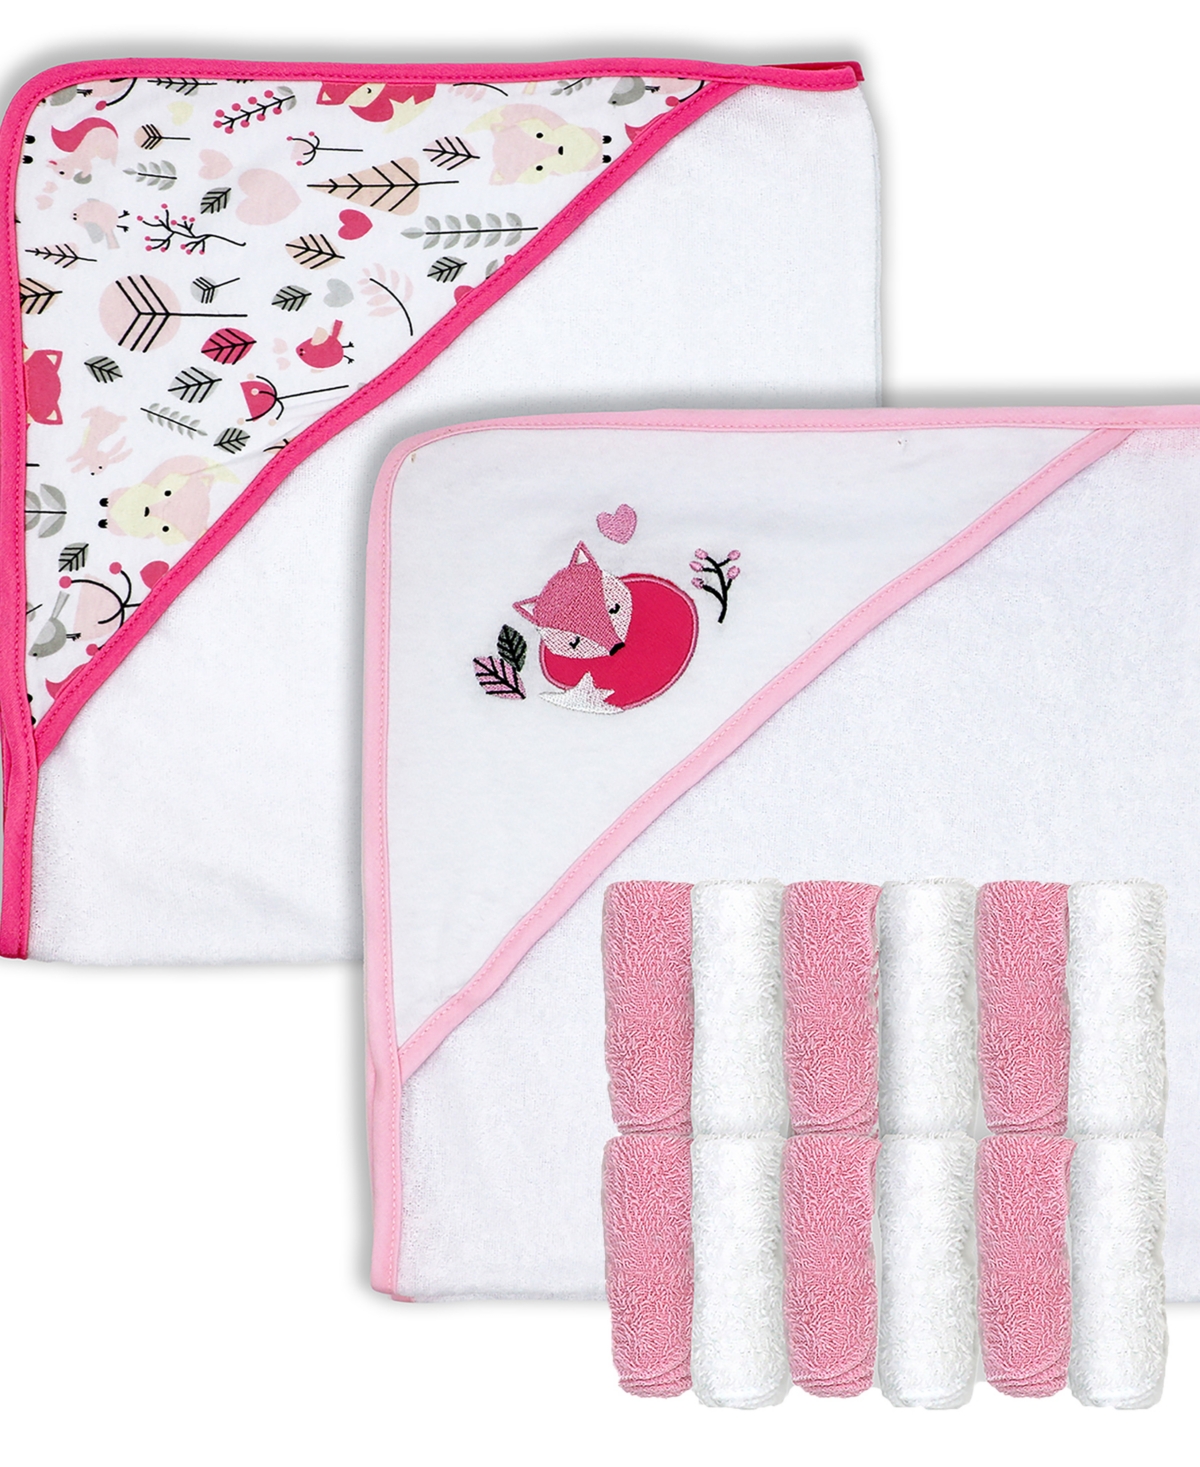 Baby Mode Baby Girls Hooded Towel And Washcloth, 14 Piece Set In Pink